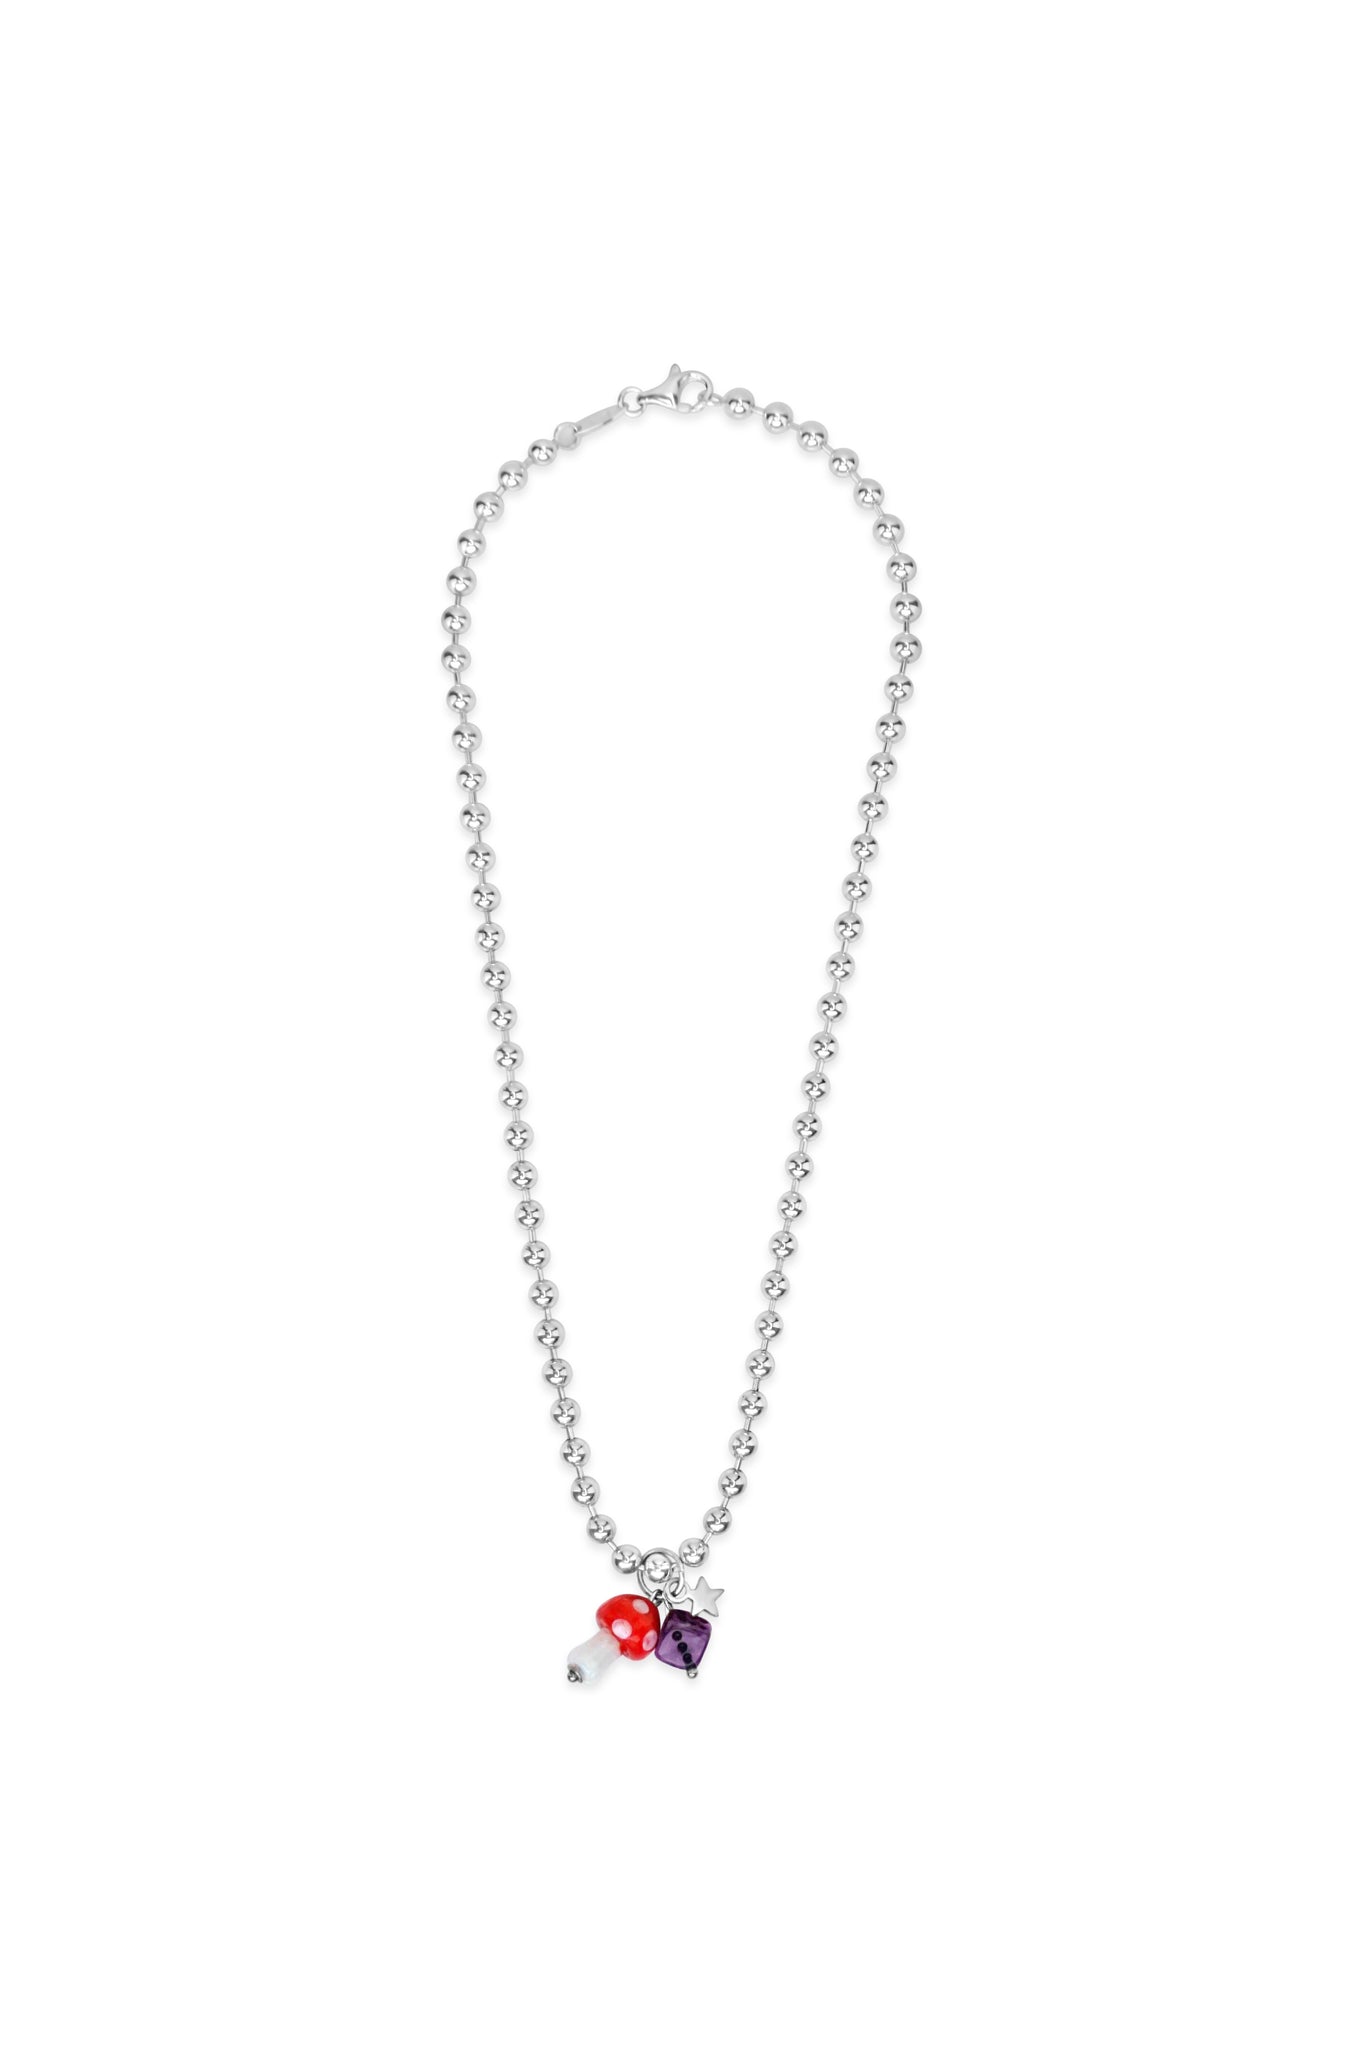 The Dice & Mushroom Charm Chain Necklace